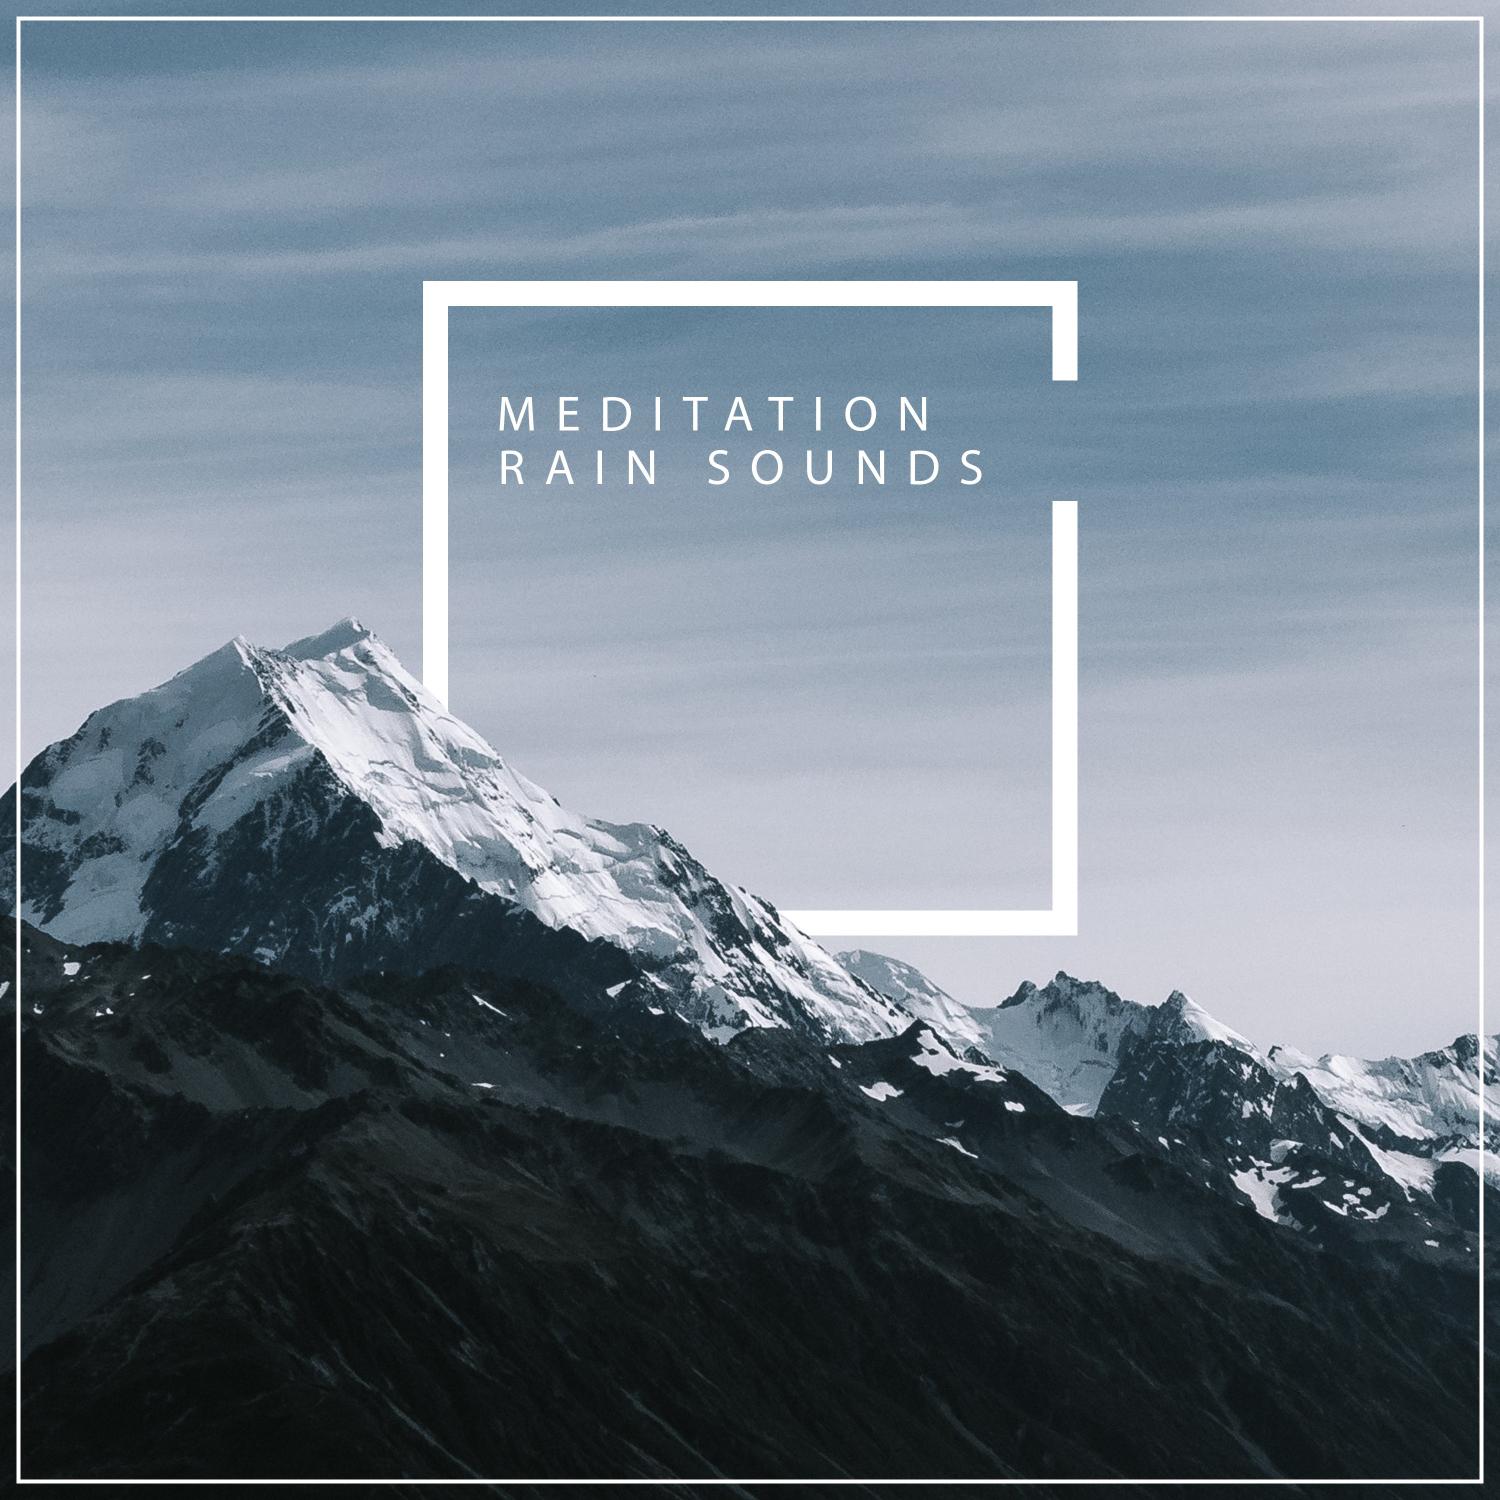 30 Meditating Rain Sounds - Tranquil Background Noise for Pure Relaxation, Sleep and Yoga